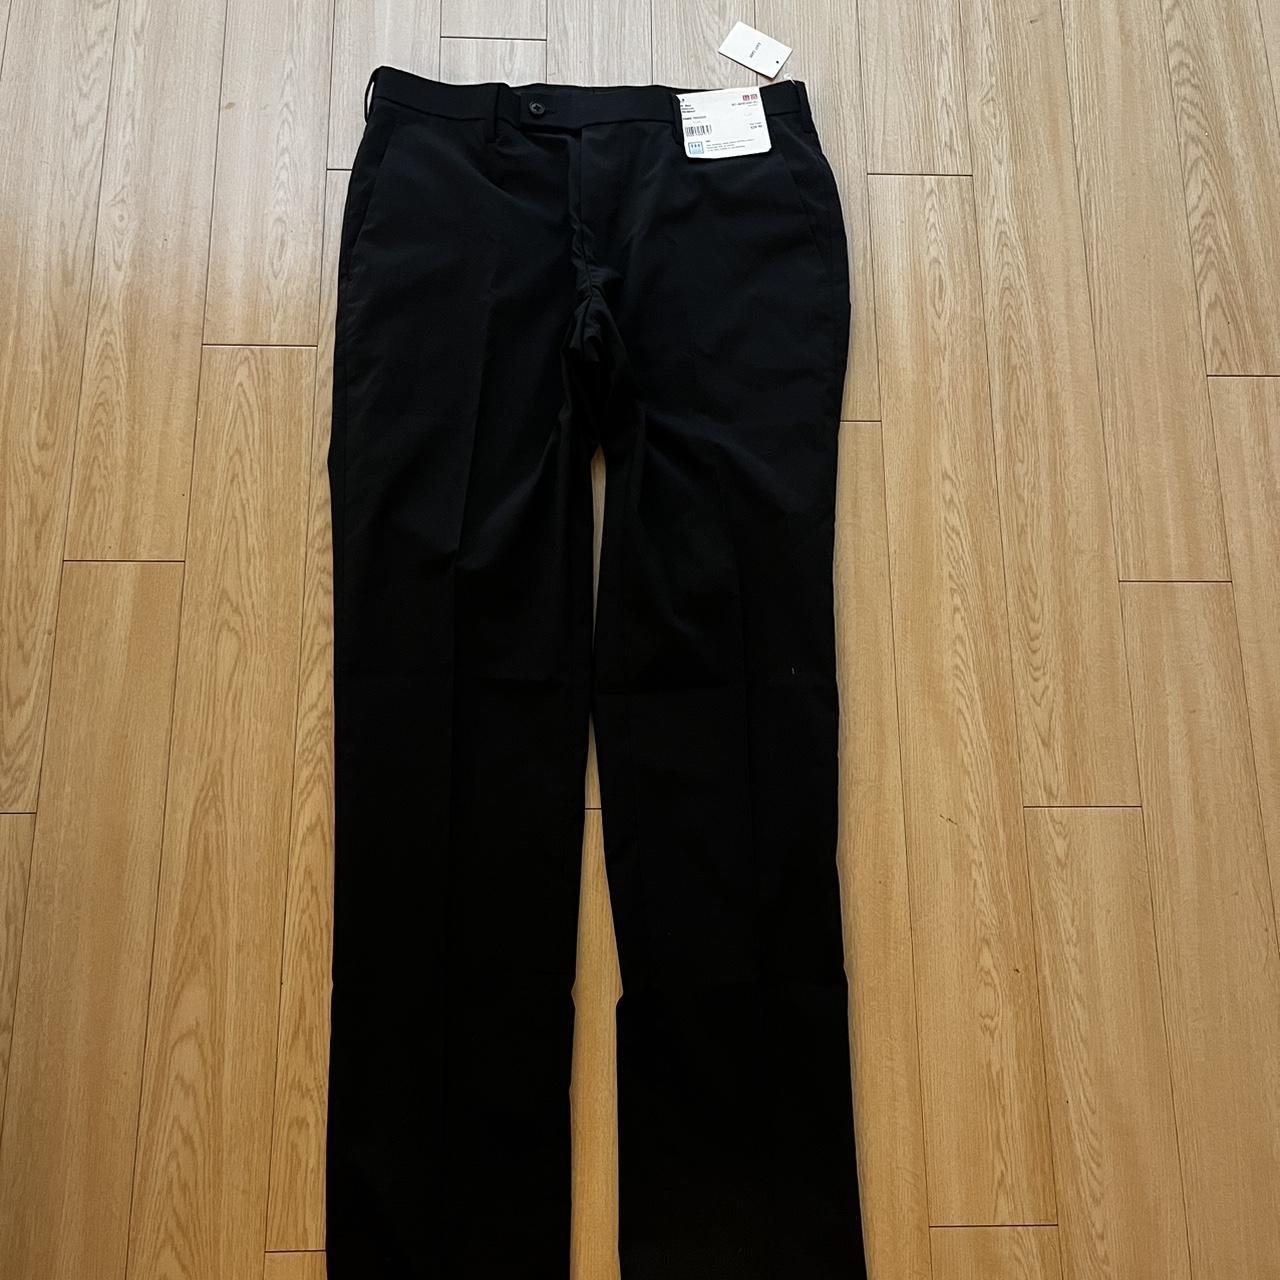 New with tags Lightweight dress pants from... - Depop